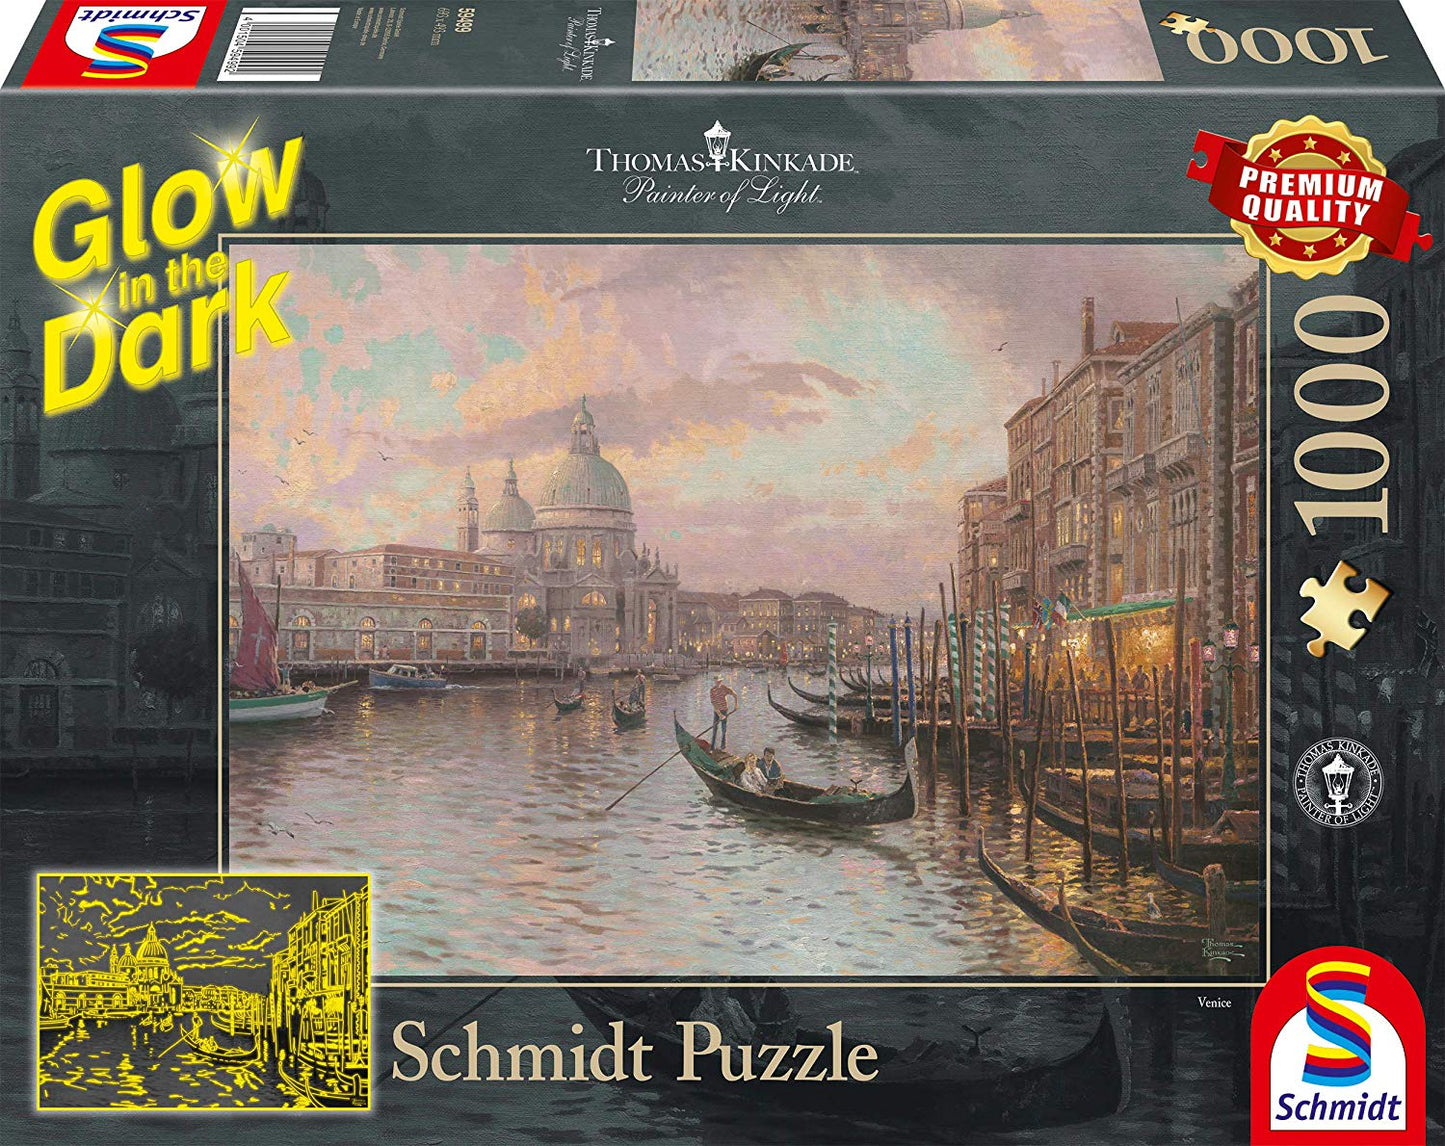 Schmidt - Thomas Kinkade - In the Streets of Venice - 1000 Piece Jigsaw Puzzle